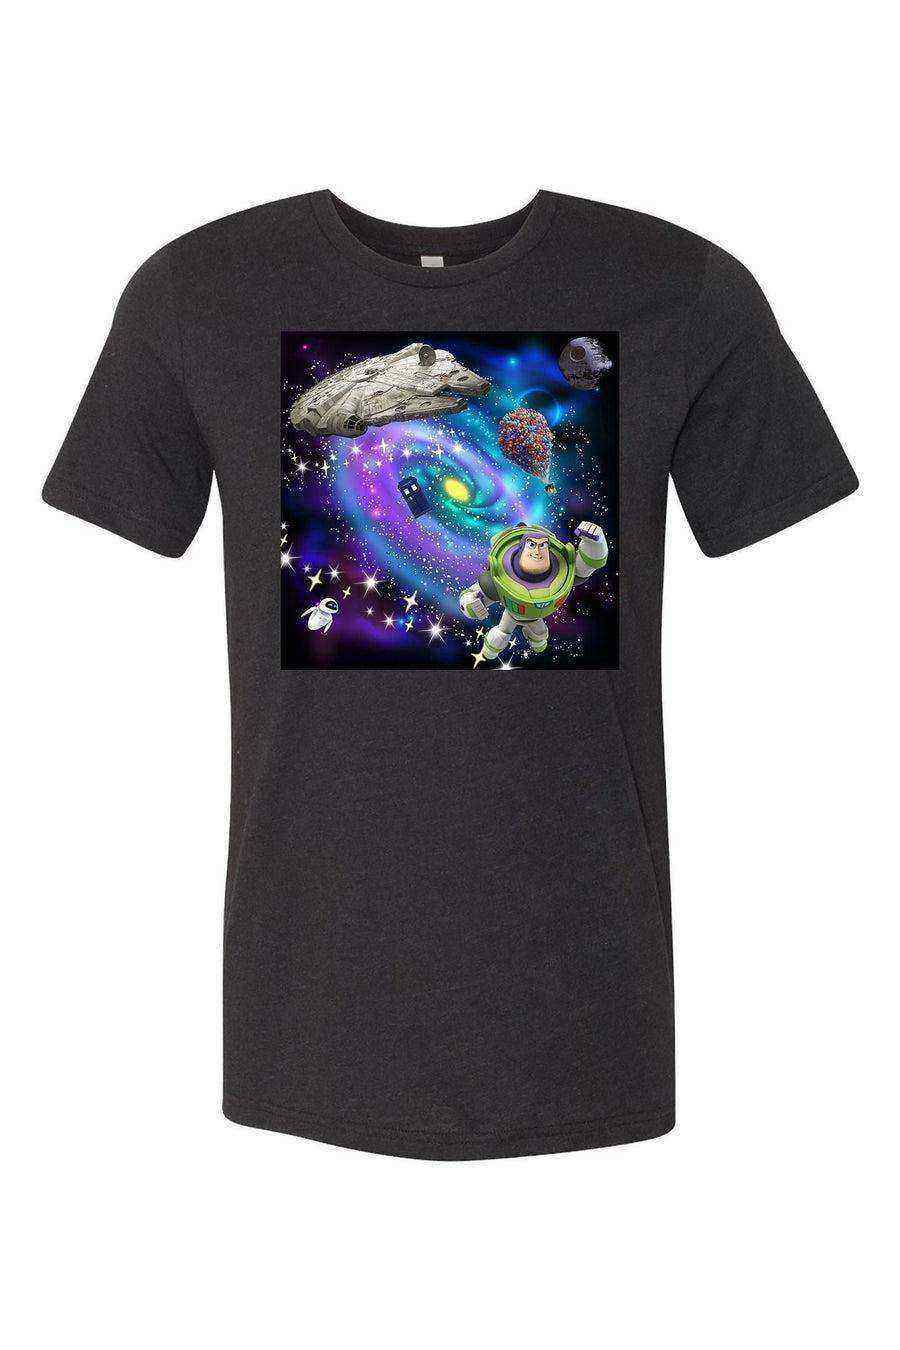 Youth | To Infinity And Beyond Shirt | Outer Space Shirt - Dylan's Tees